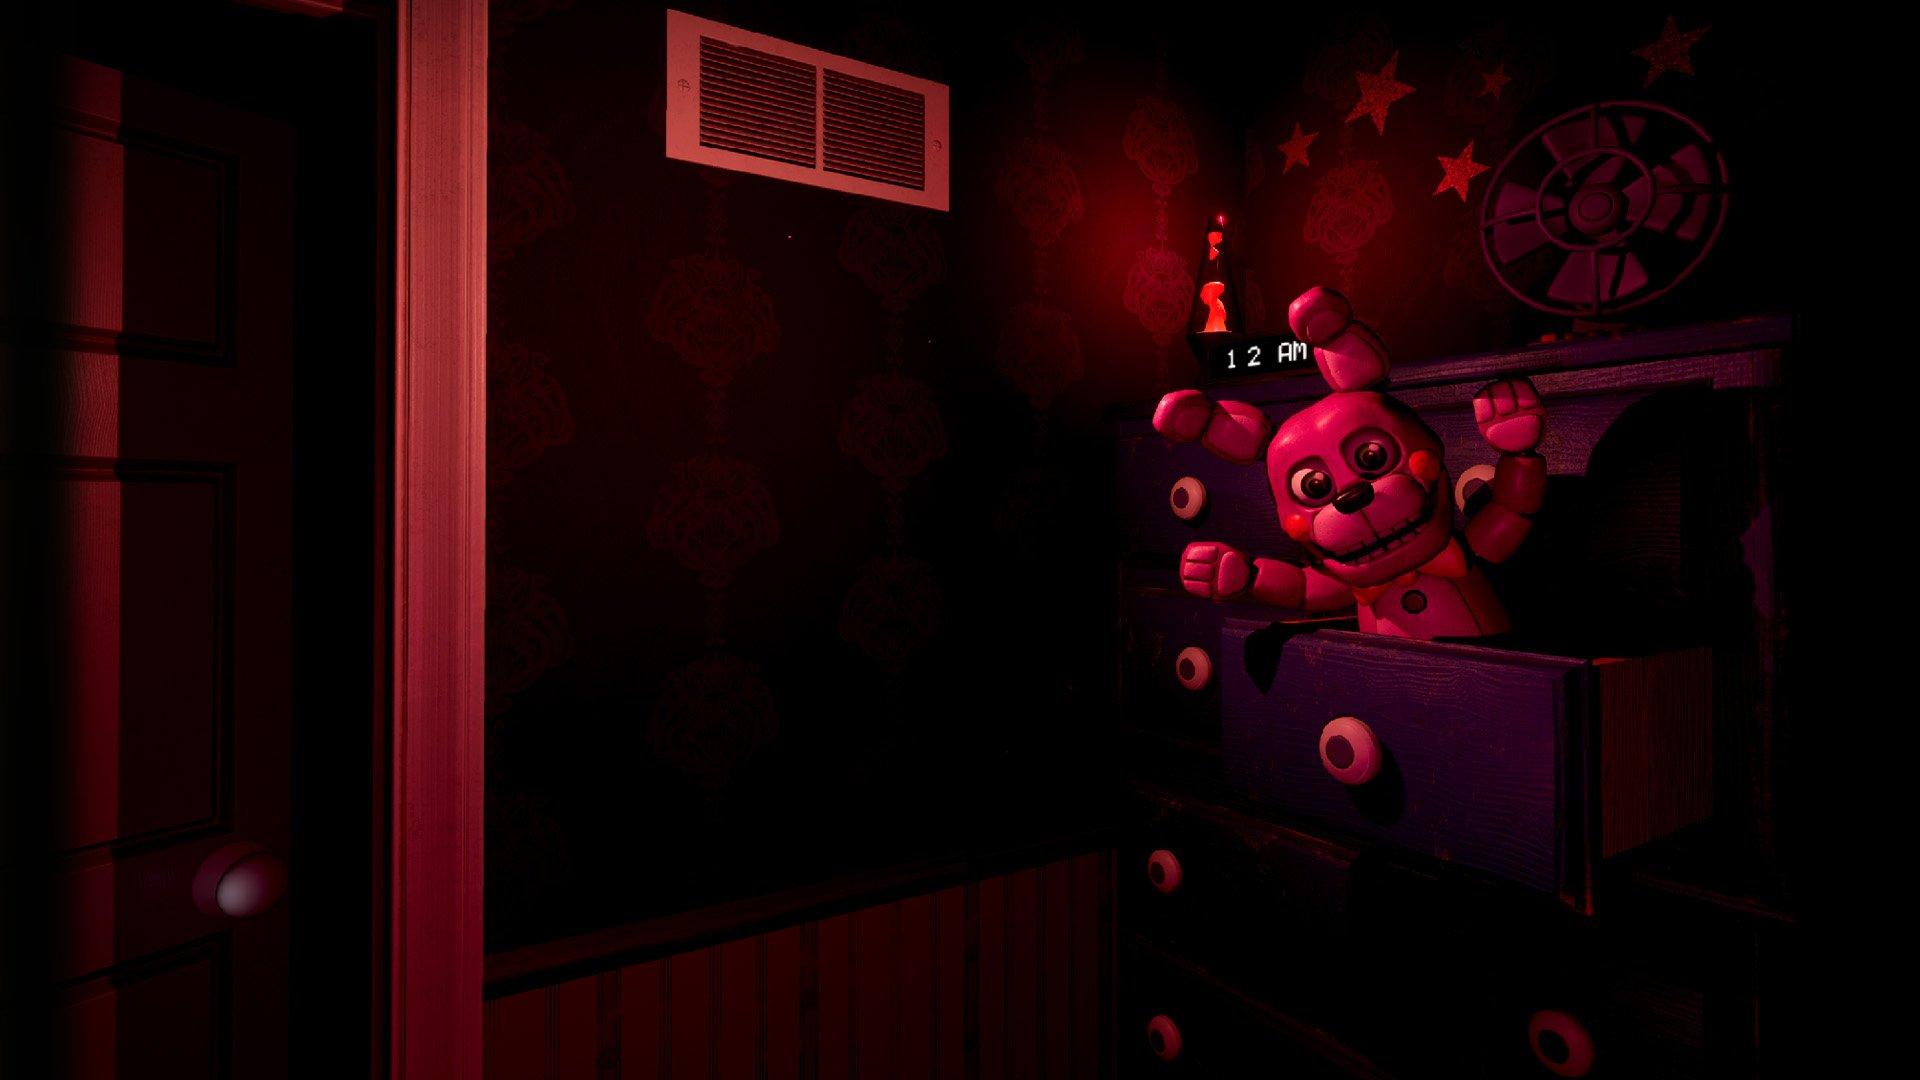 Five Nights at Freddy's - Help Wanted (PS4) : Video Games 